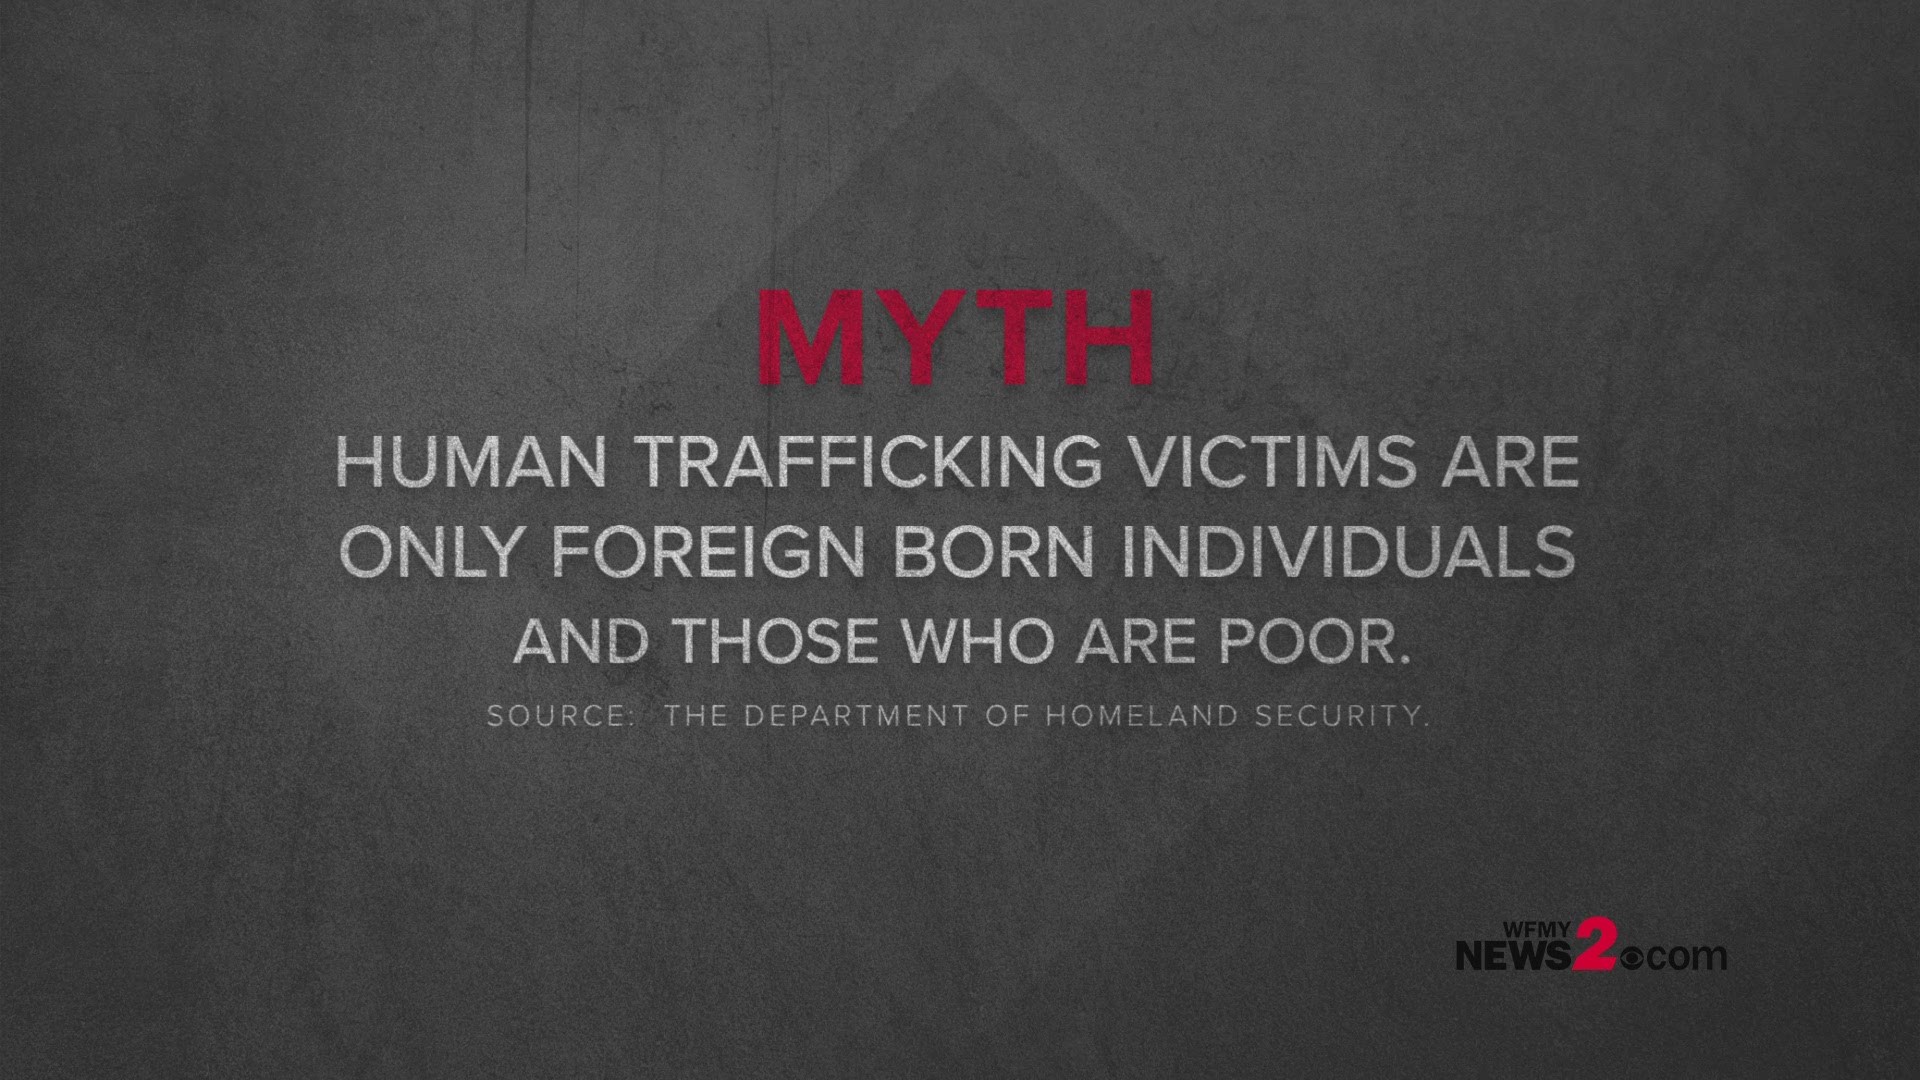 Human trafficking doesn't only happen among foreign born individuals and low-incomes areas. In fact, the Department of Homeland Security says it can happen to anyone regardless of age, race, gender, nationality and socioeconomic group.